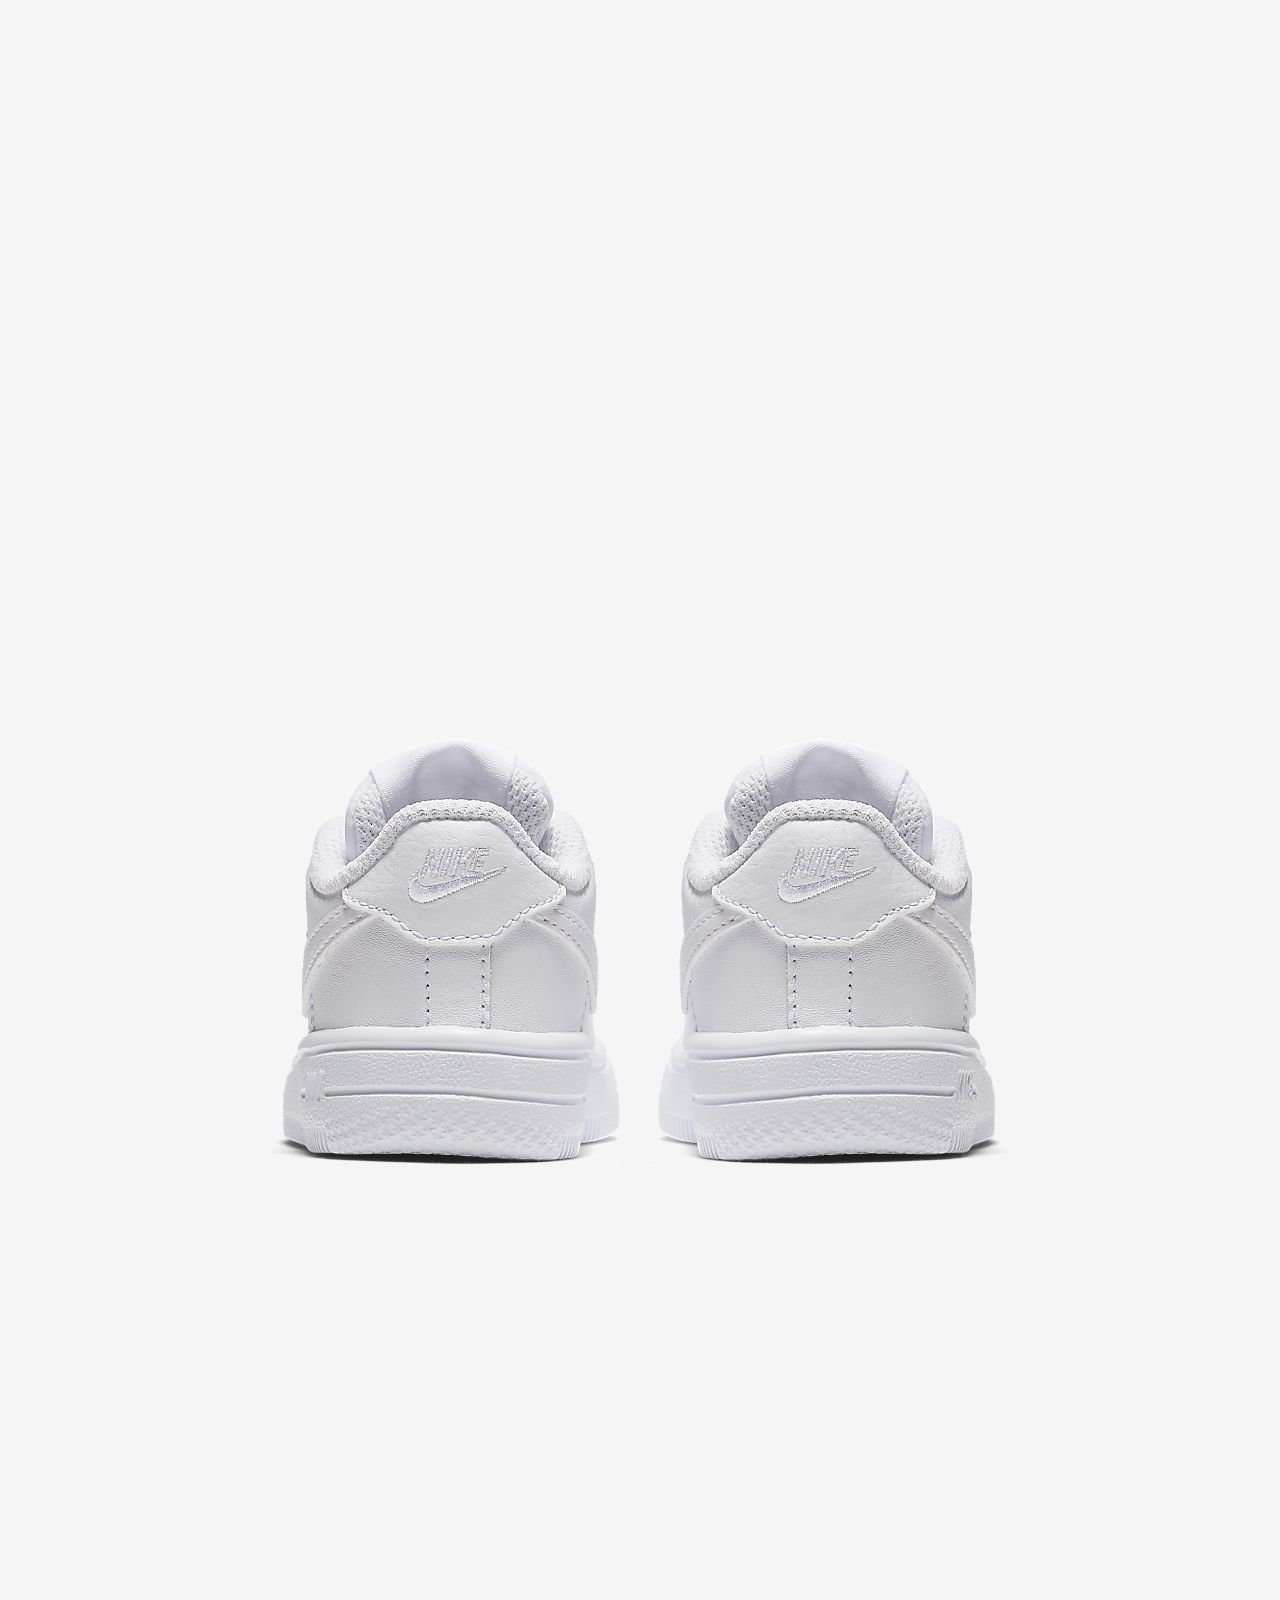 nike force 1 18 baby